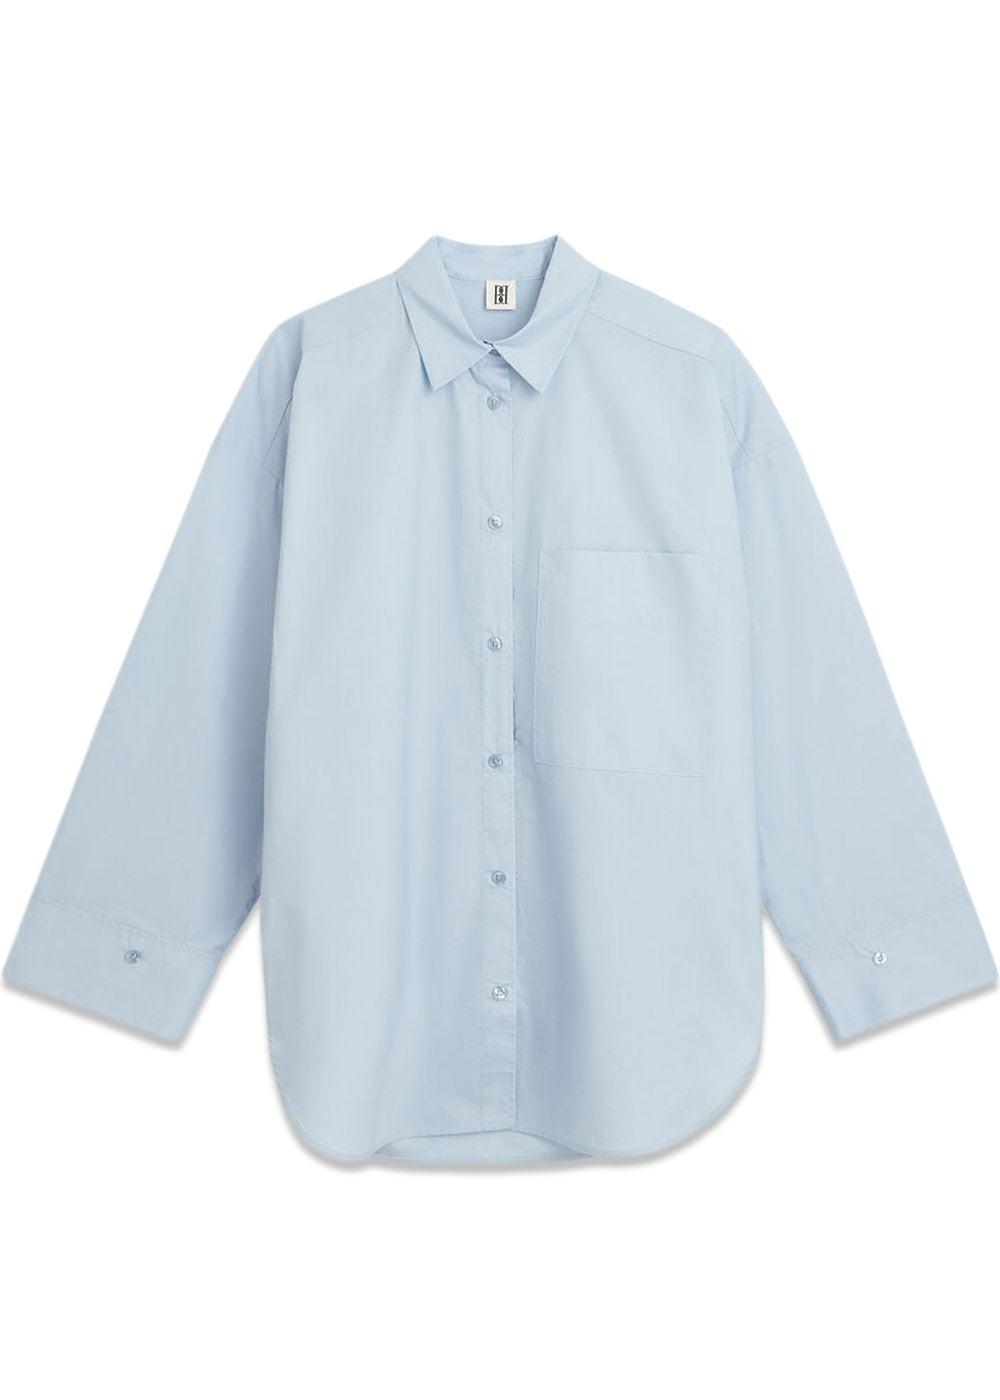 By Malene Birgers DERRIS - Periwinkle Blue. Køb shirts her.